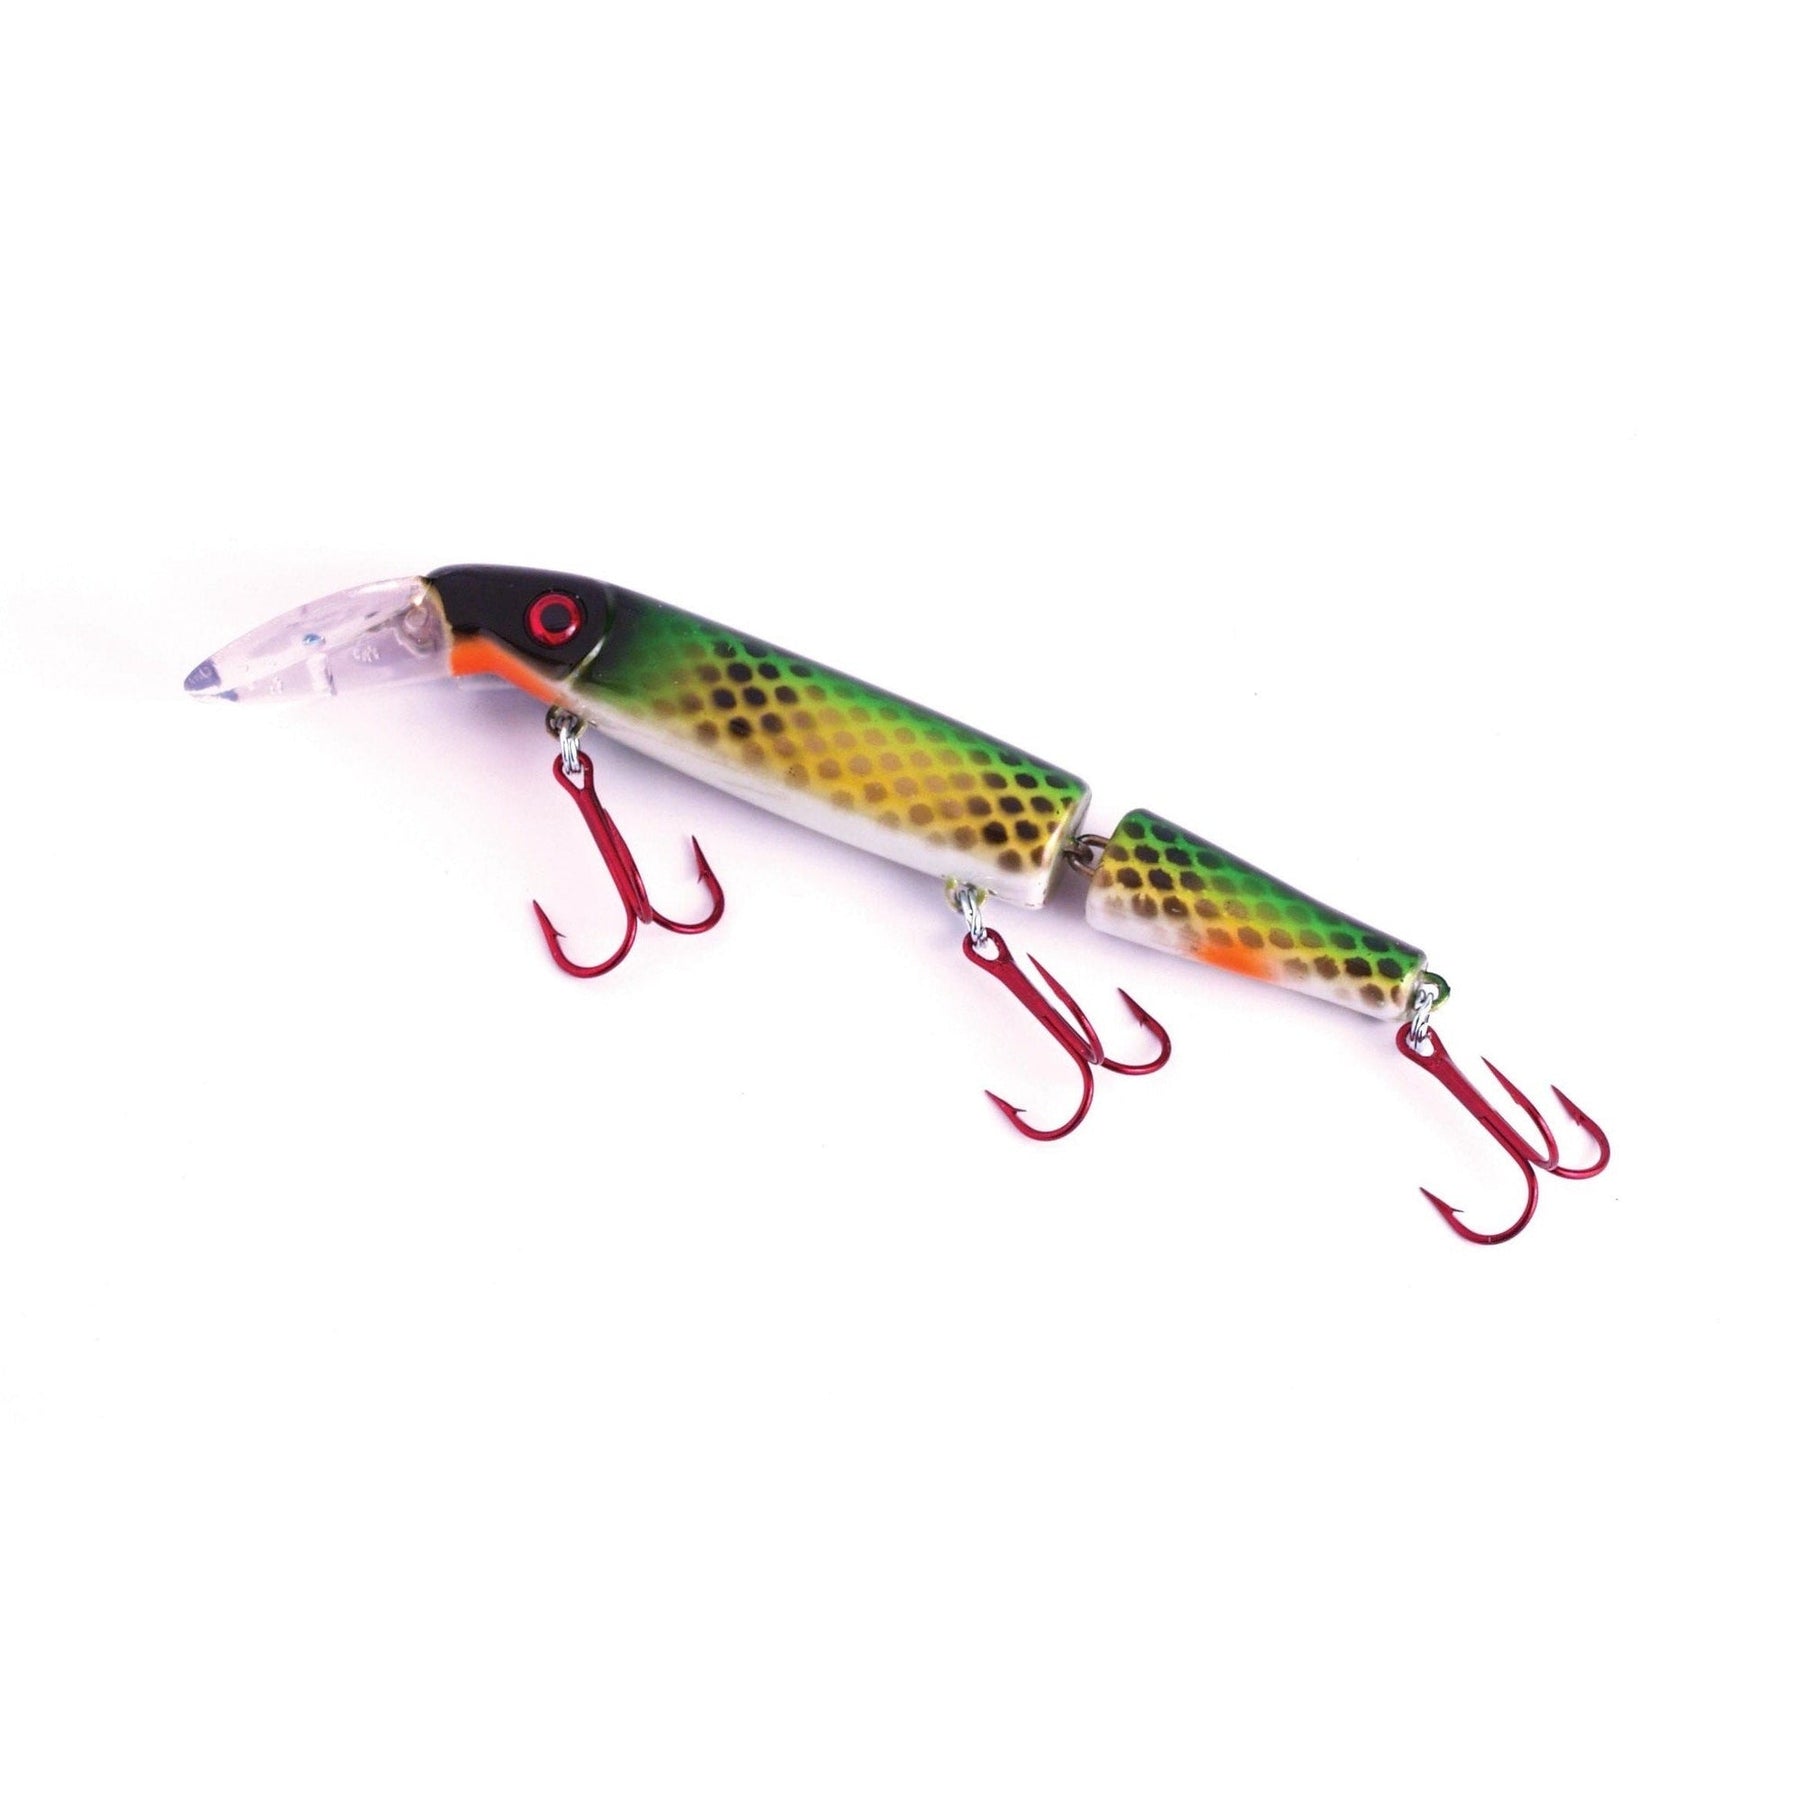 View of Crankbaits Suick Wrangler Cisco Kid Perch available at EZOKO Pike and Musky Shop